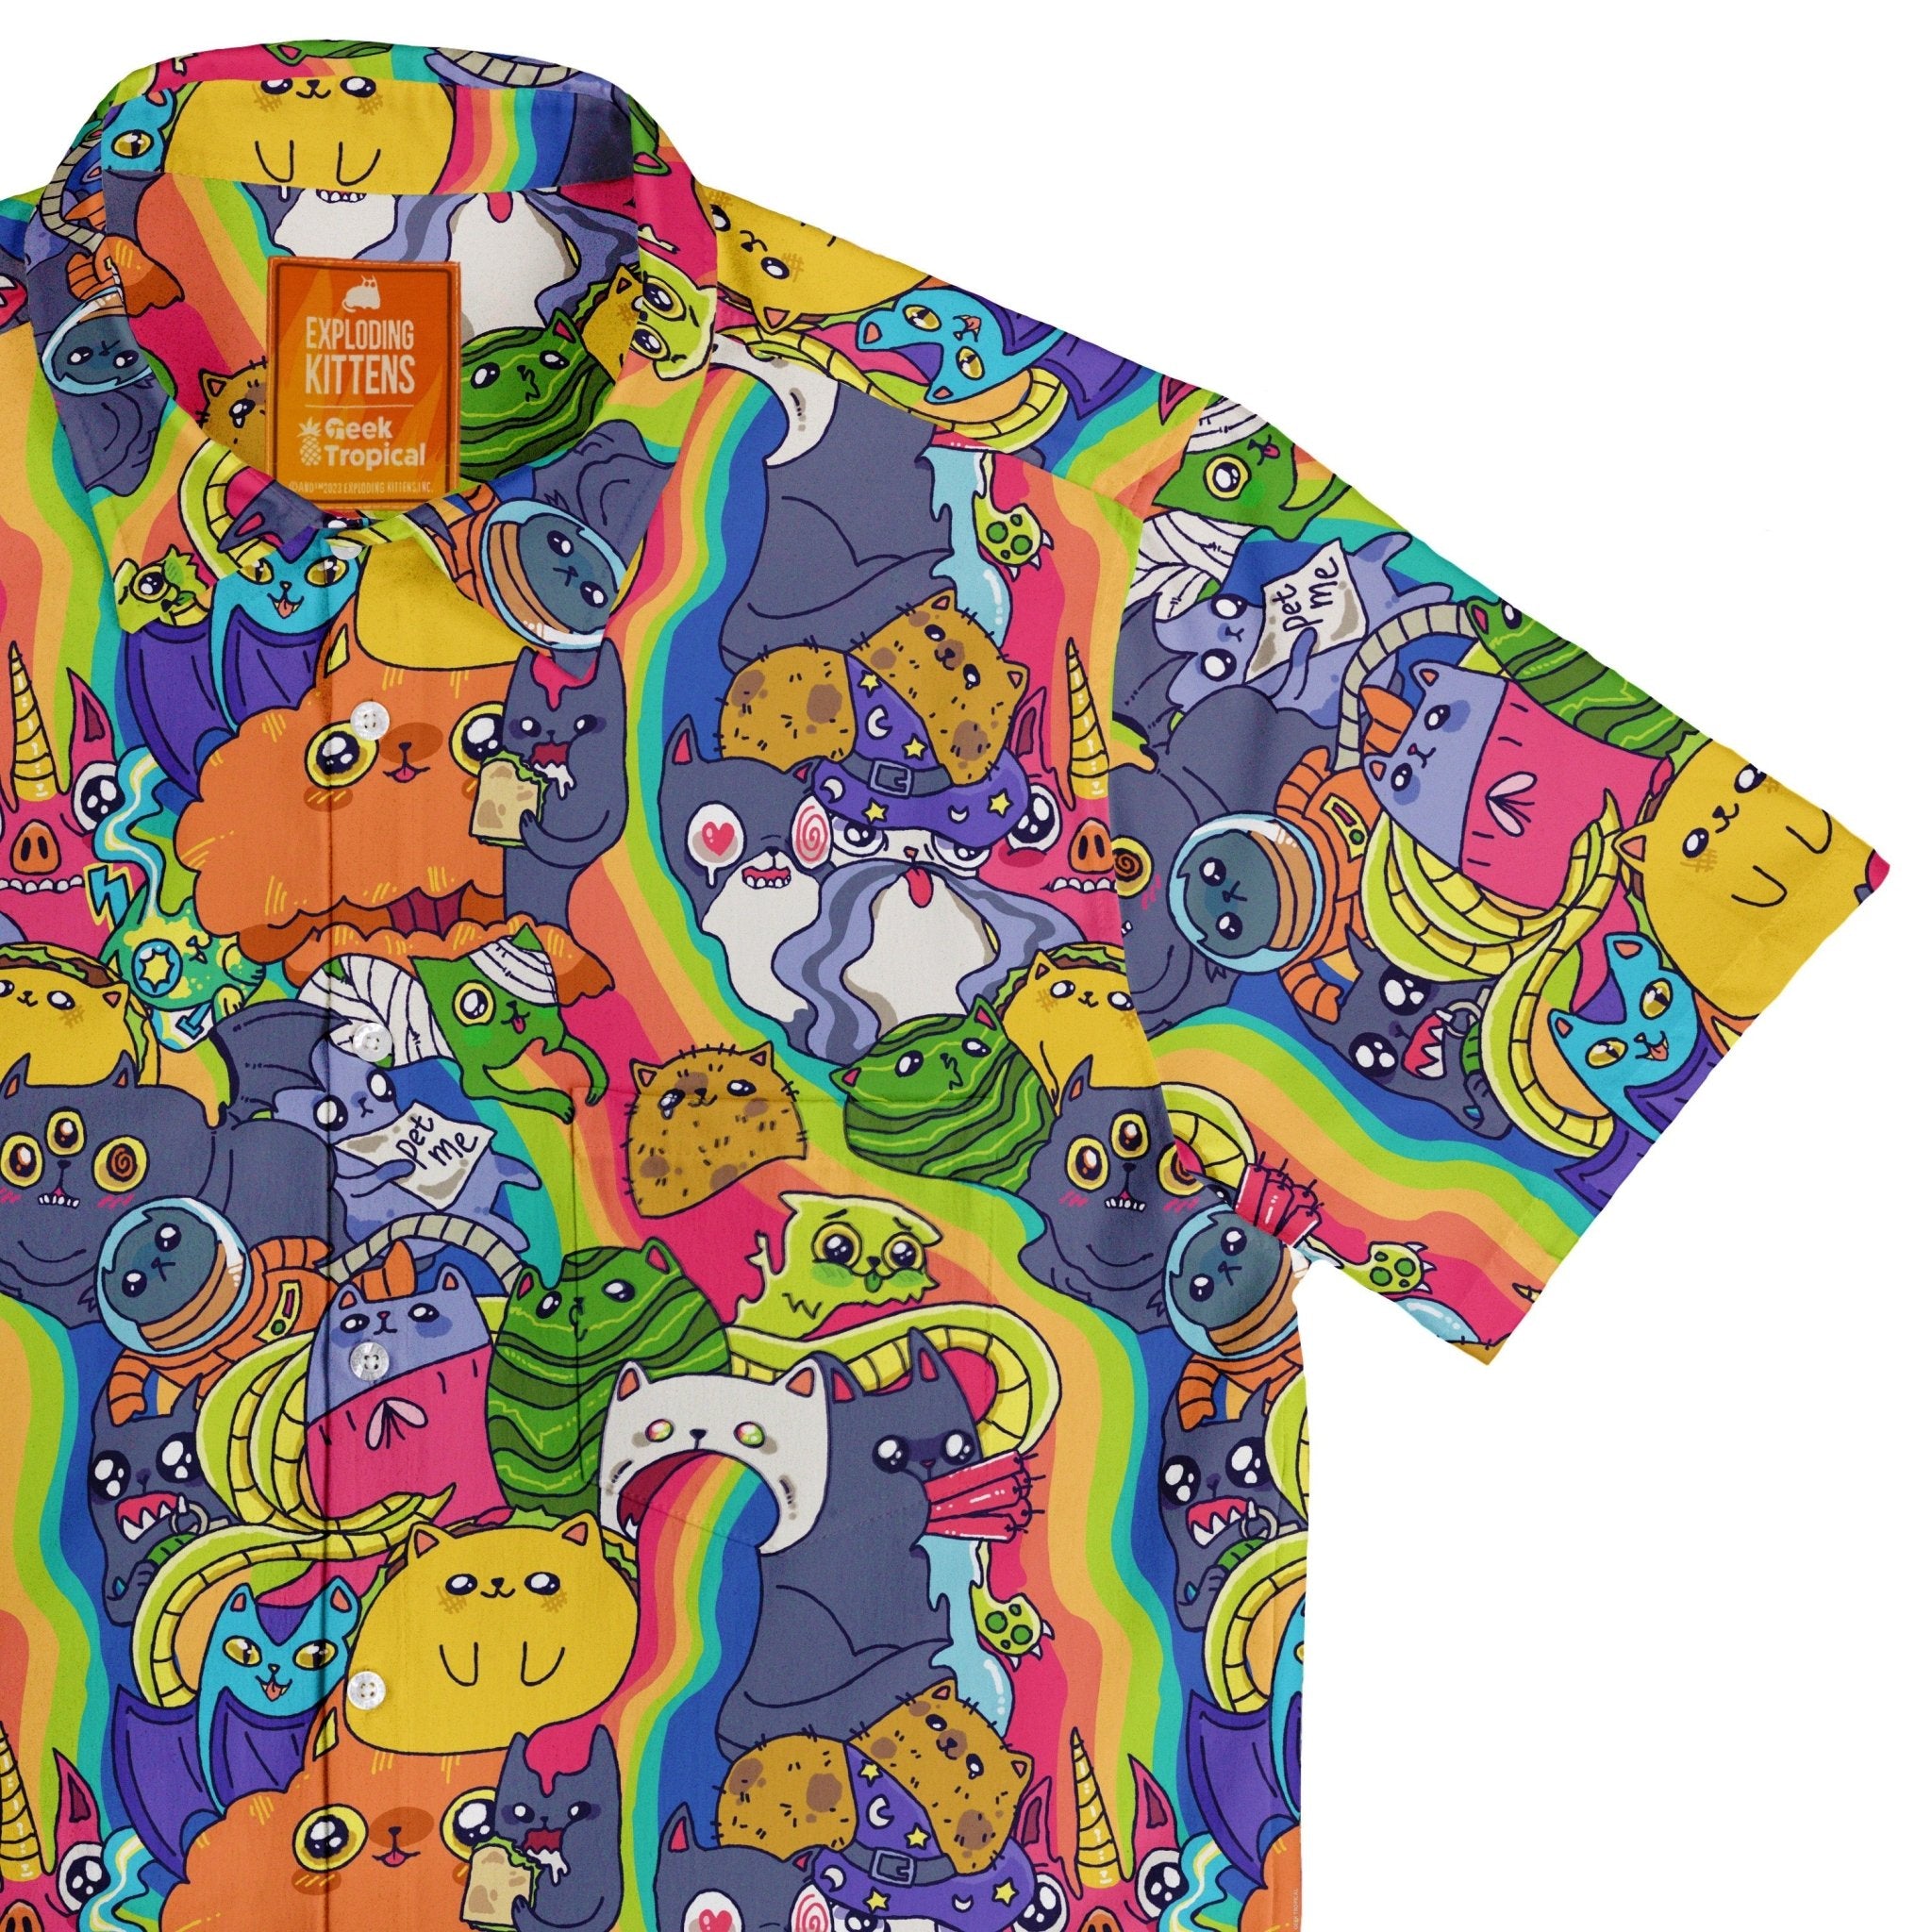 Exploding Kittens Rainbow Explosion Button Up Shirt - adult sizing - Animal Patterns - board game print